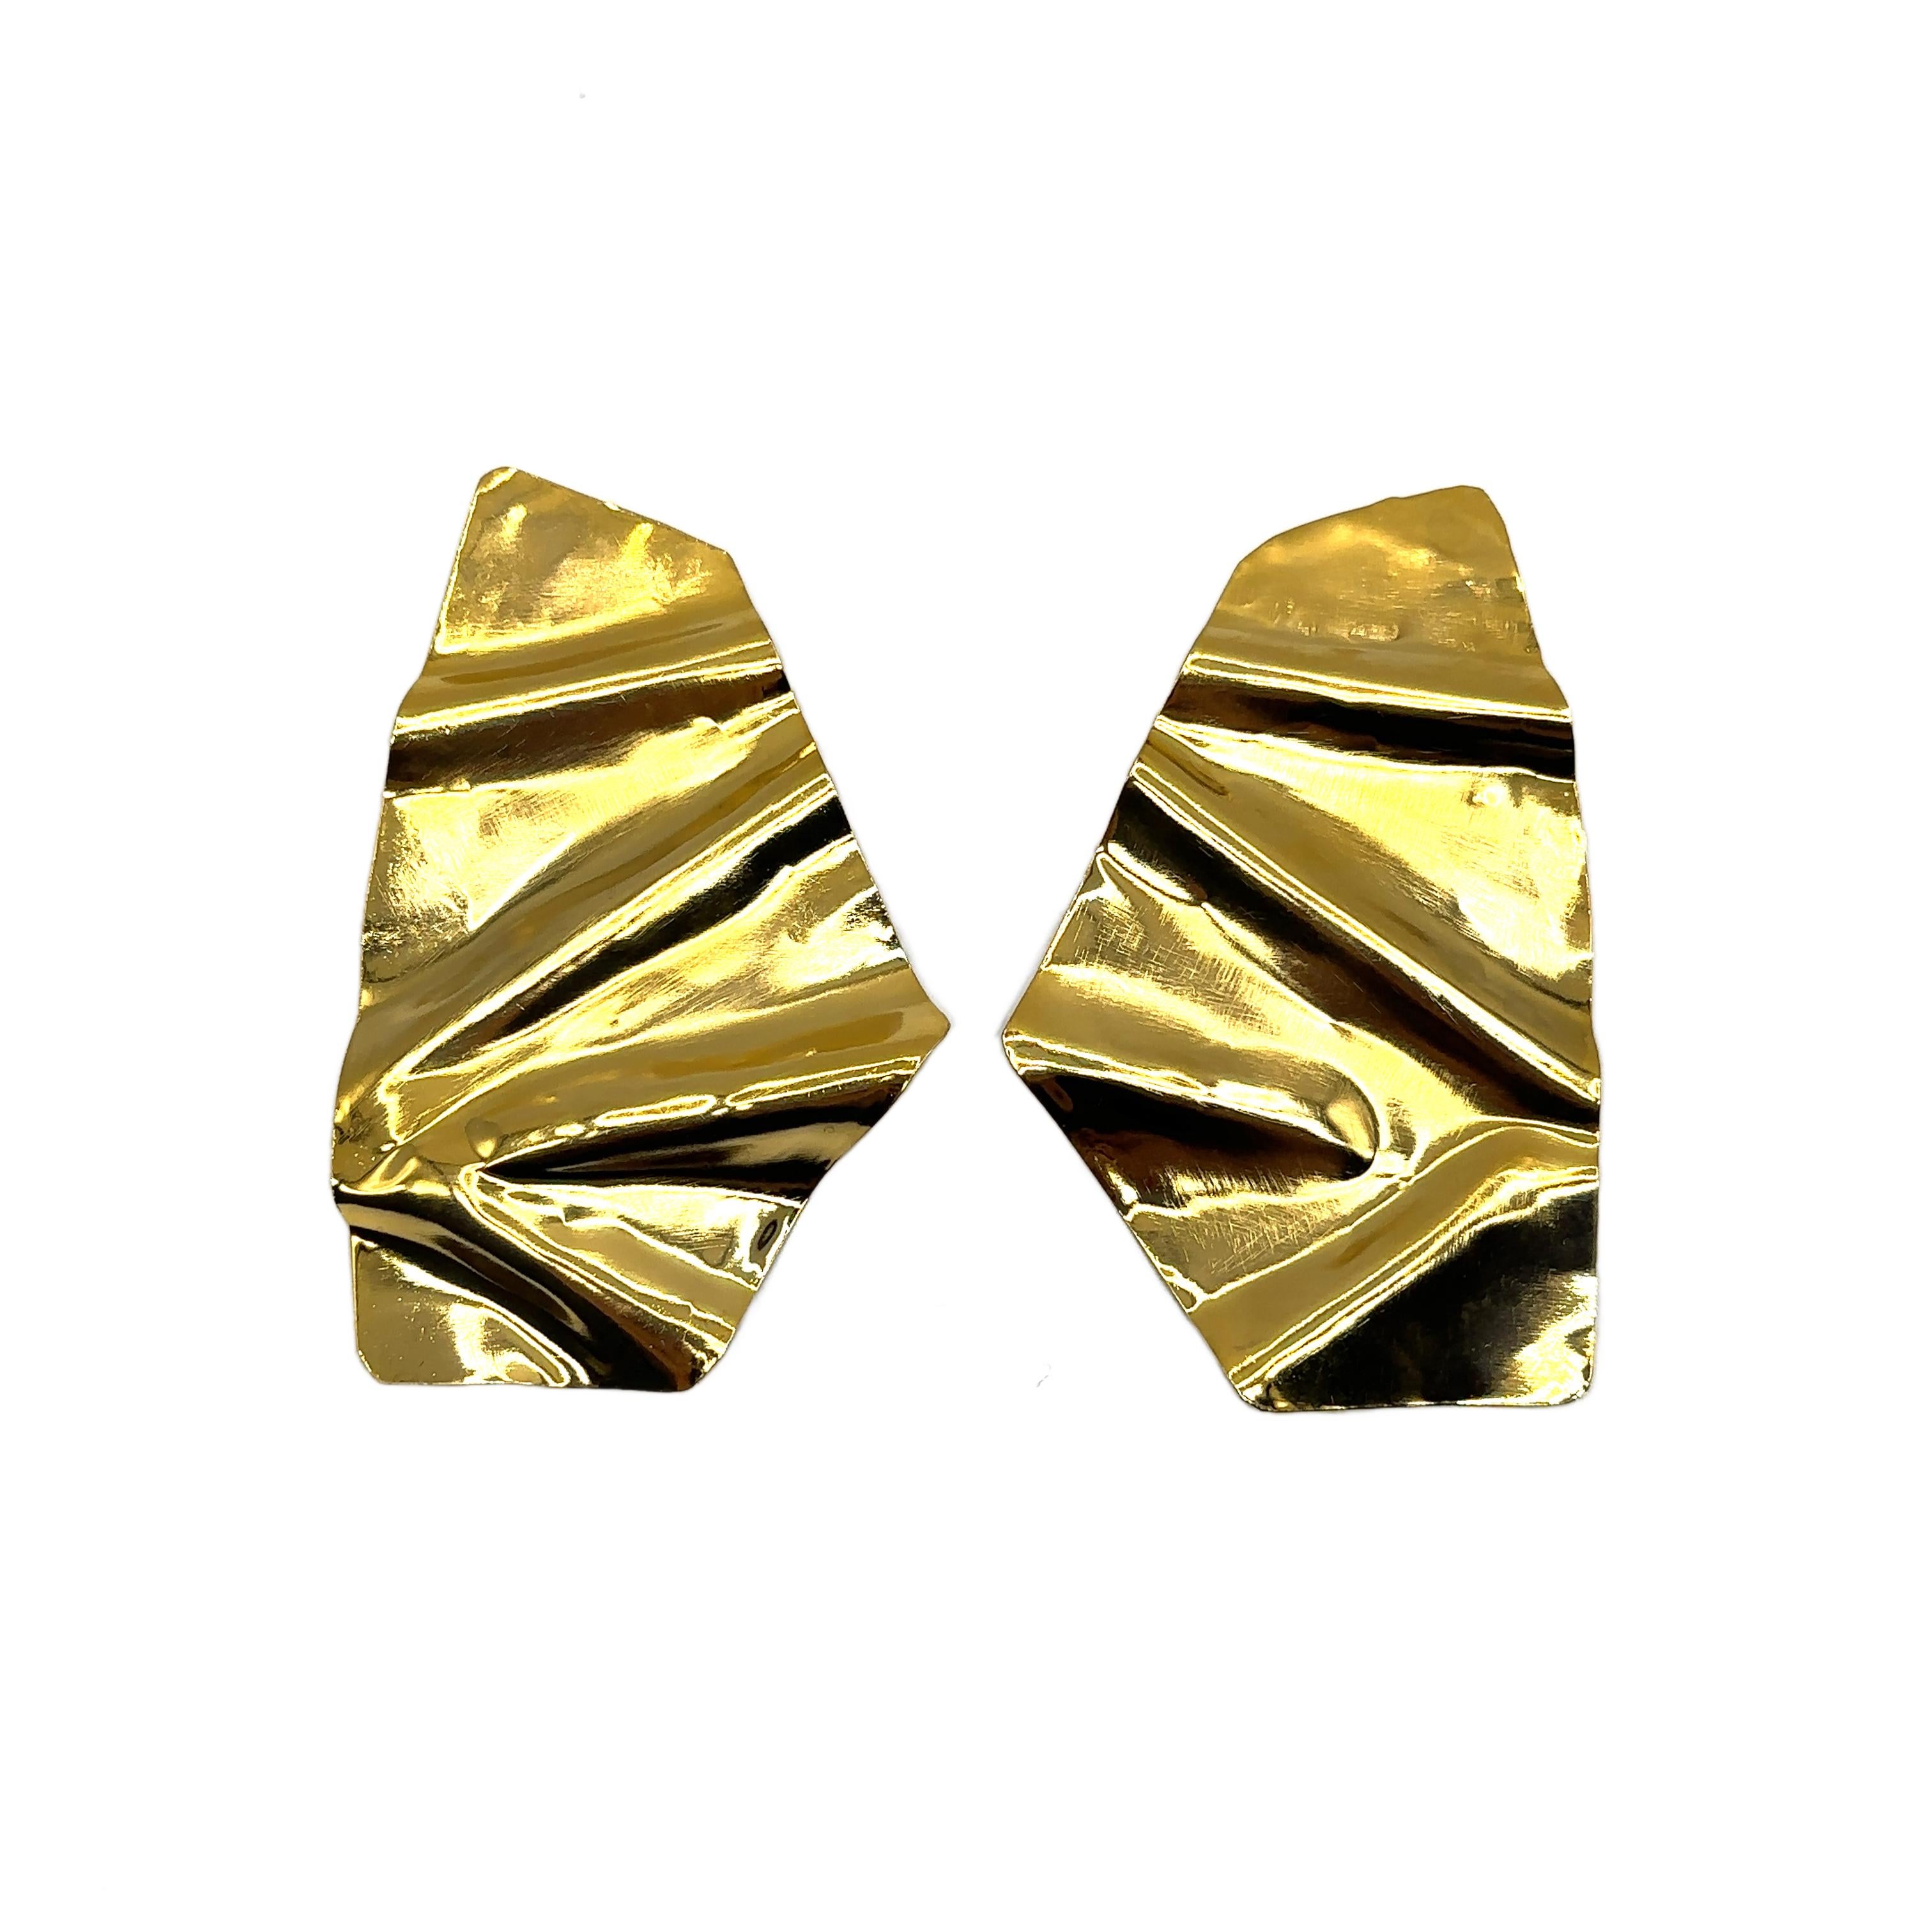 Constanza - Dangle Earrings 14k gold plated In New Condition For Sale In Forest Hills, NY